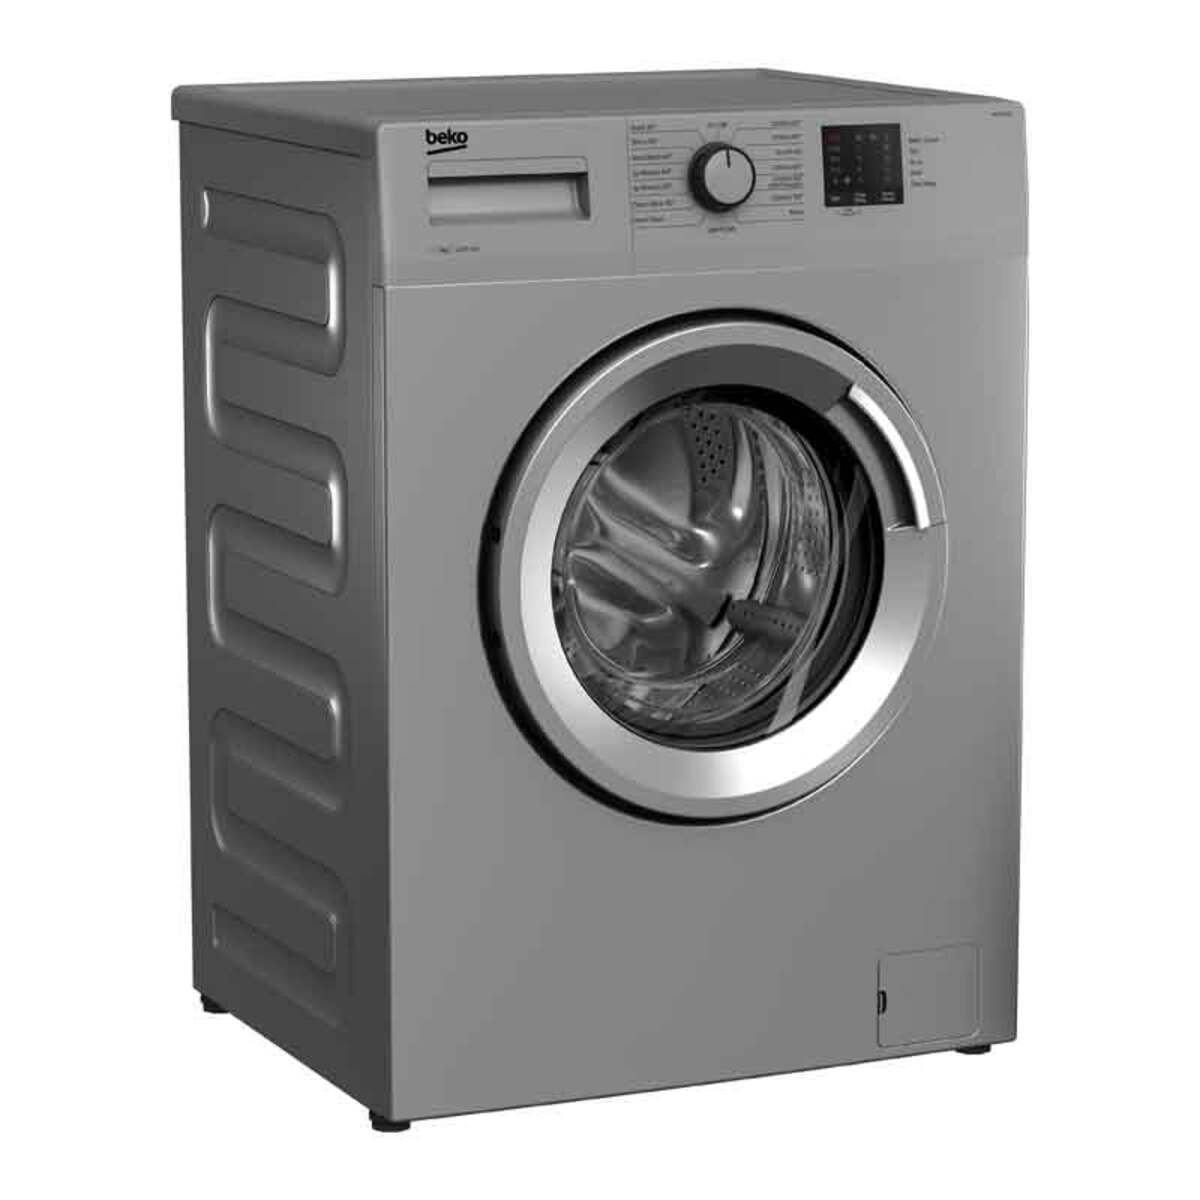 Beko WTK72041S D Rated 7kg 1200 Spin Washing Machine in Silver